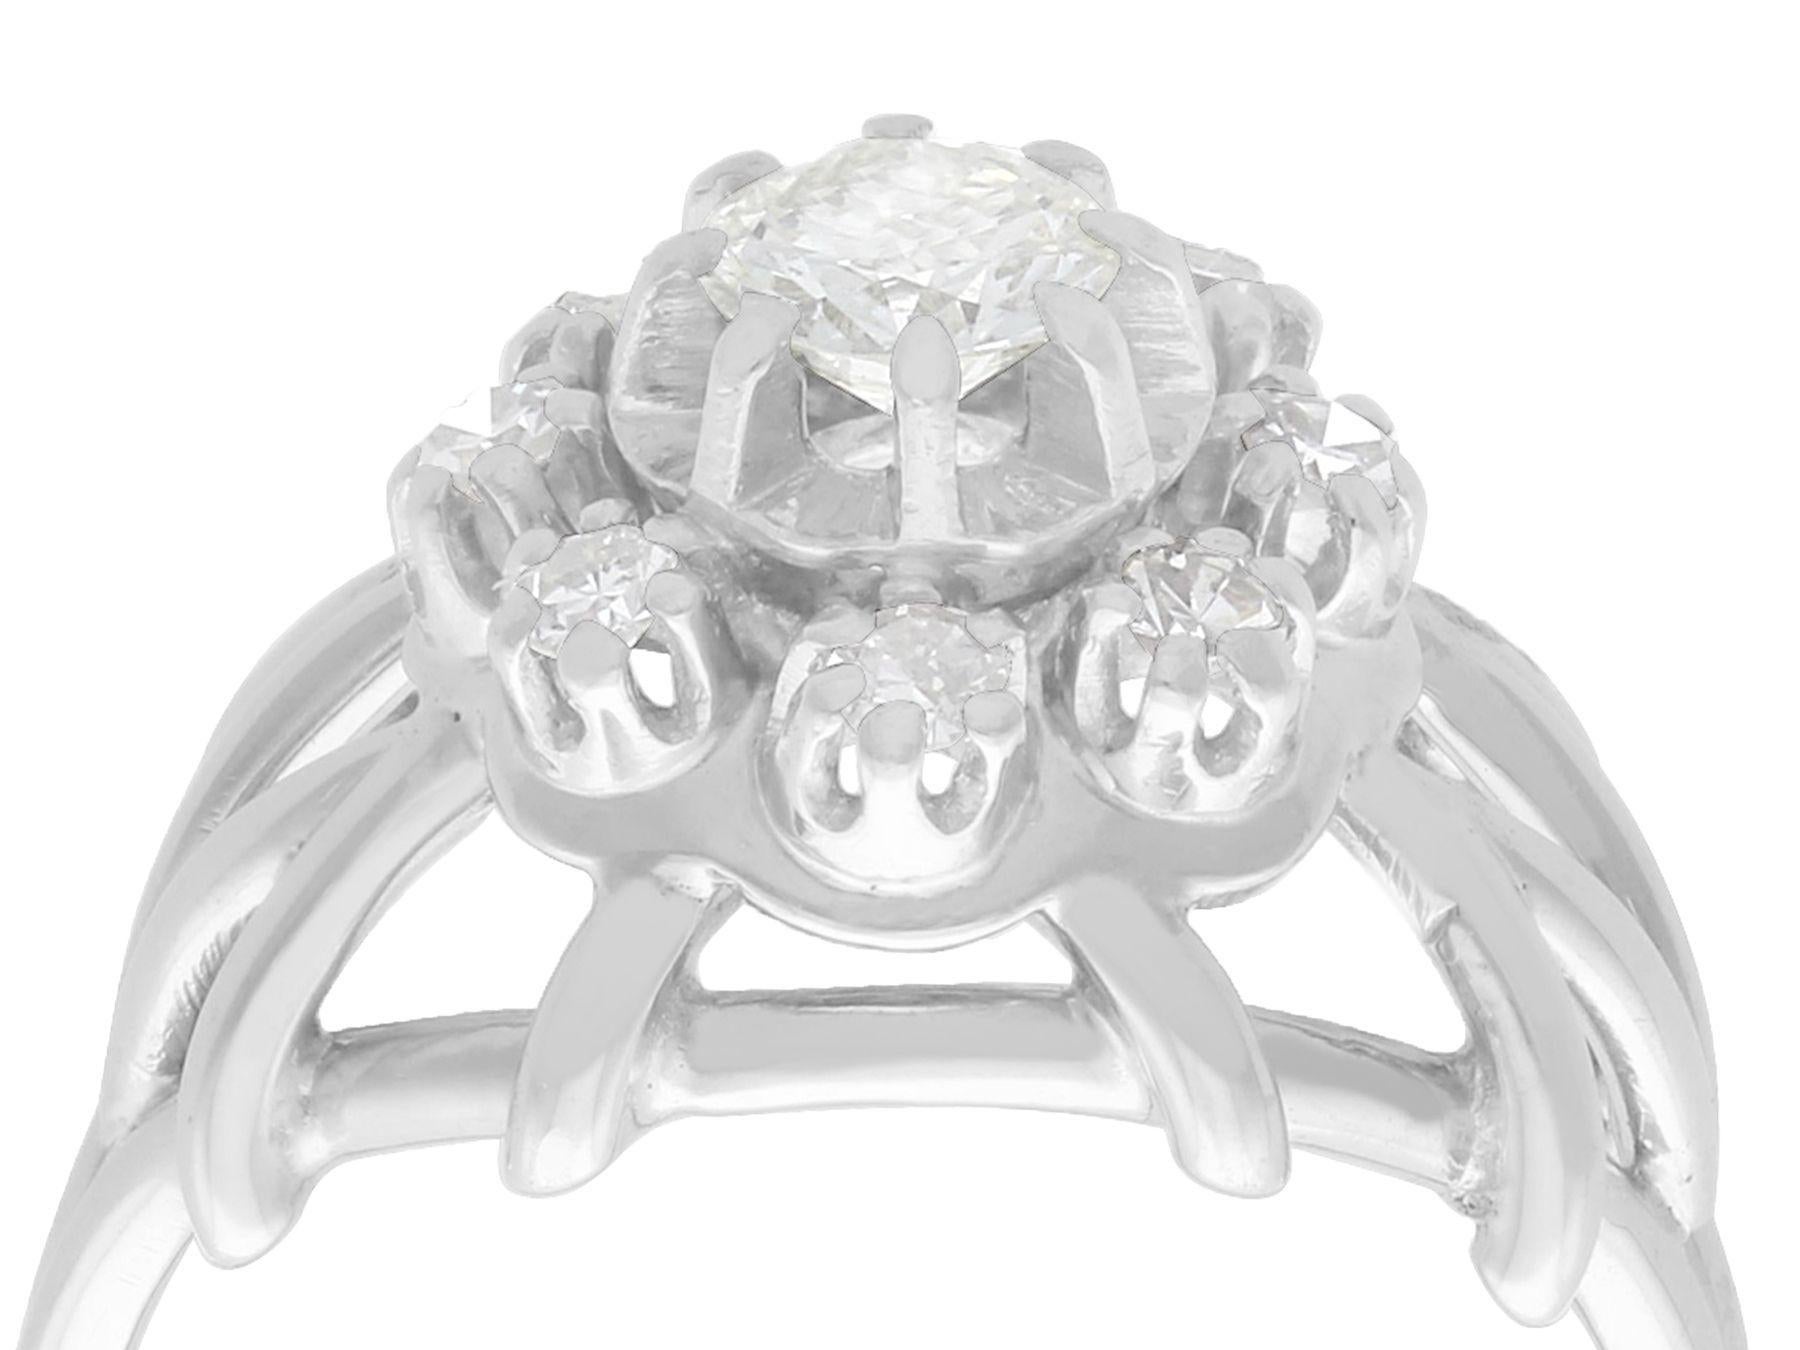 A stunning, fine and impressive 0.73 carat diamond, 15 karat white gold and platinum set cluster ring; part of our diverse antique jewelry and estate jewelry collections

This stunning, fine and impressive antique cluster ring has been crafted in